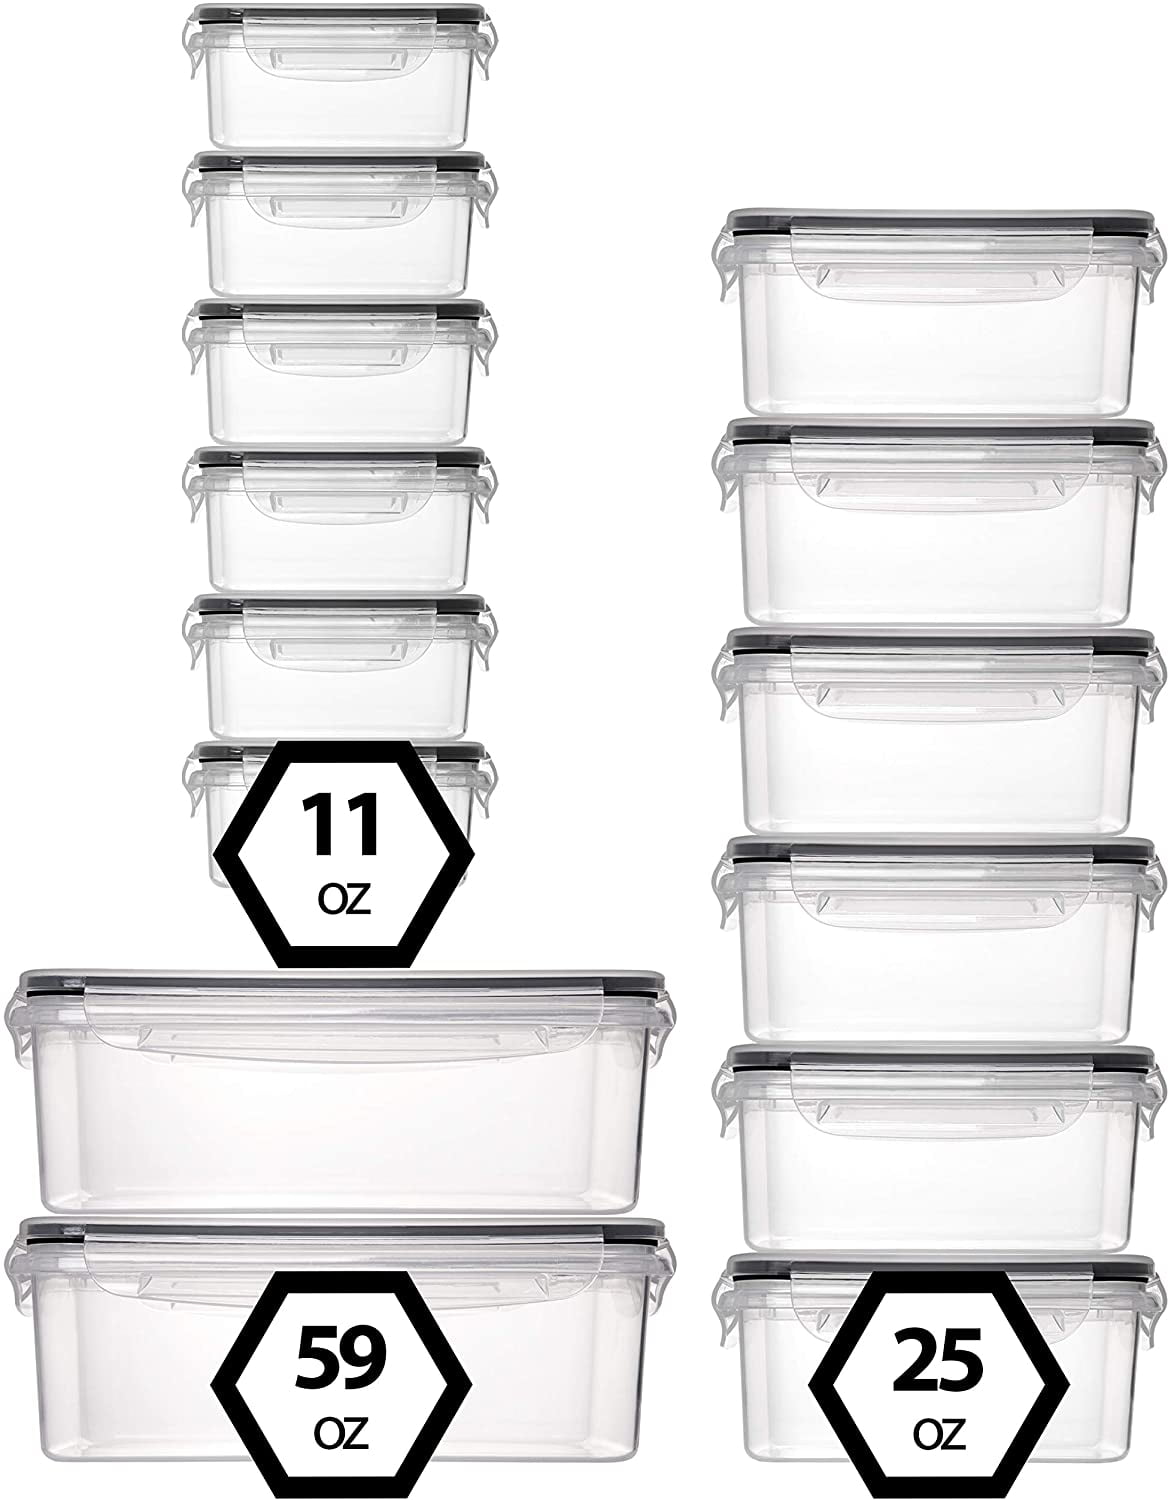 HOMBERKING Large Food Storage Containers with Lids, [12 Piece] Glass Meal  Prep Containers, Airtight Glass Bento Boxes, BPA Free & Leak Proof (6lids 